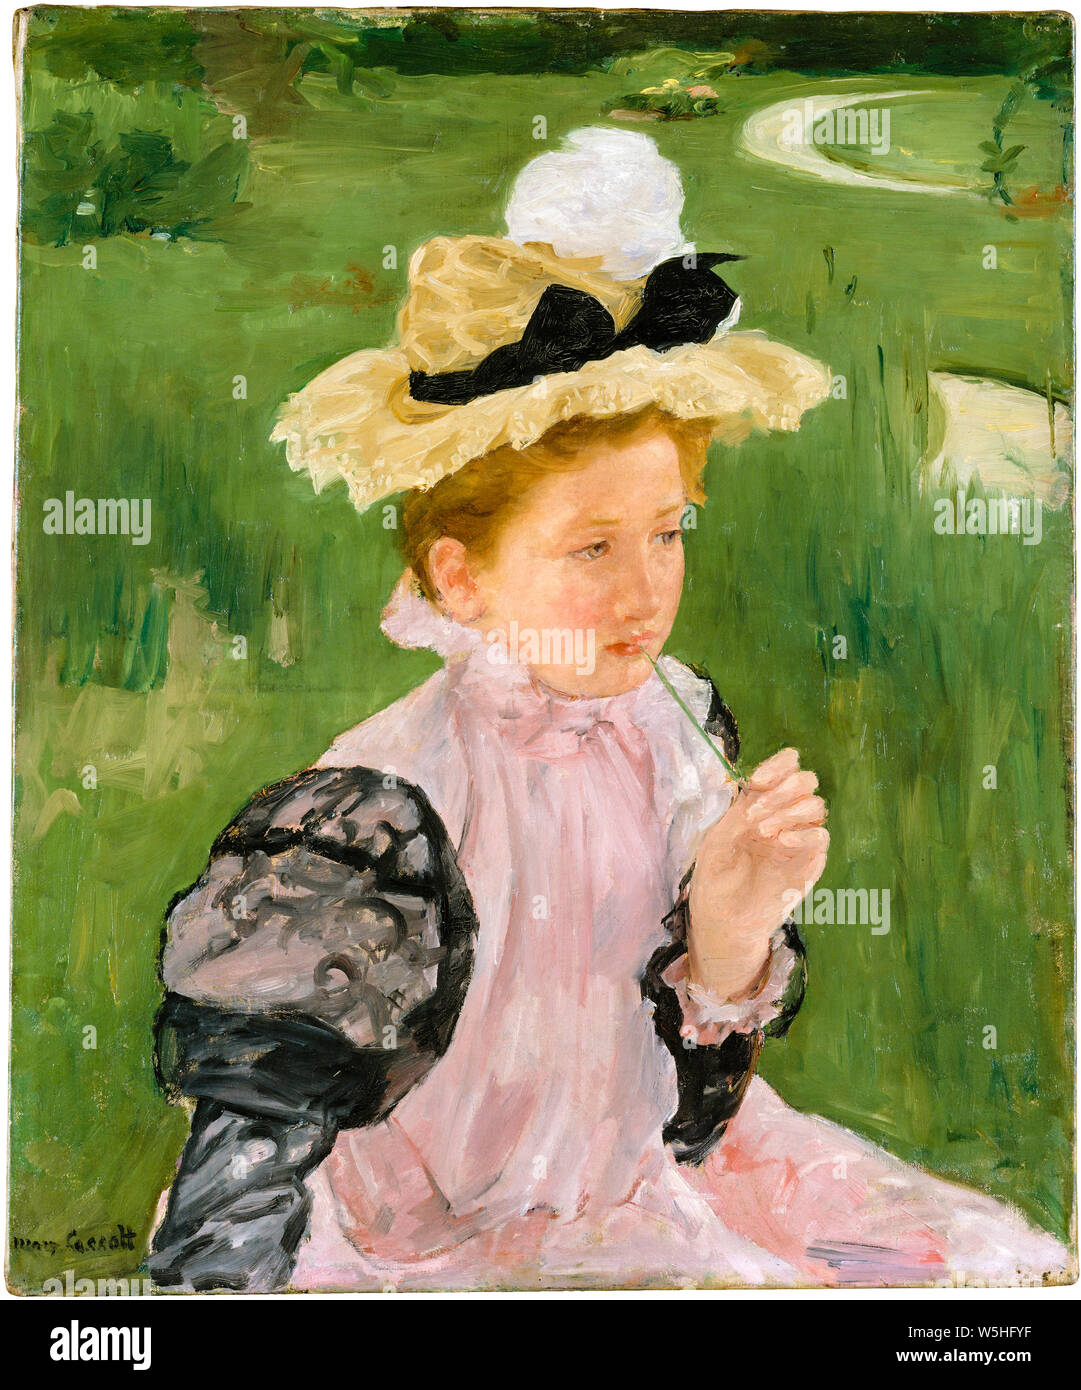 Mary Cassatt, painting, Portrait of a Young Girl, 1899 Stock Photo